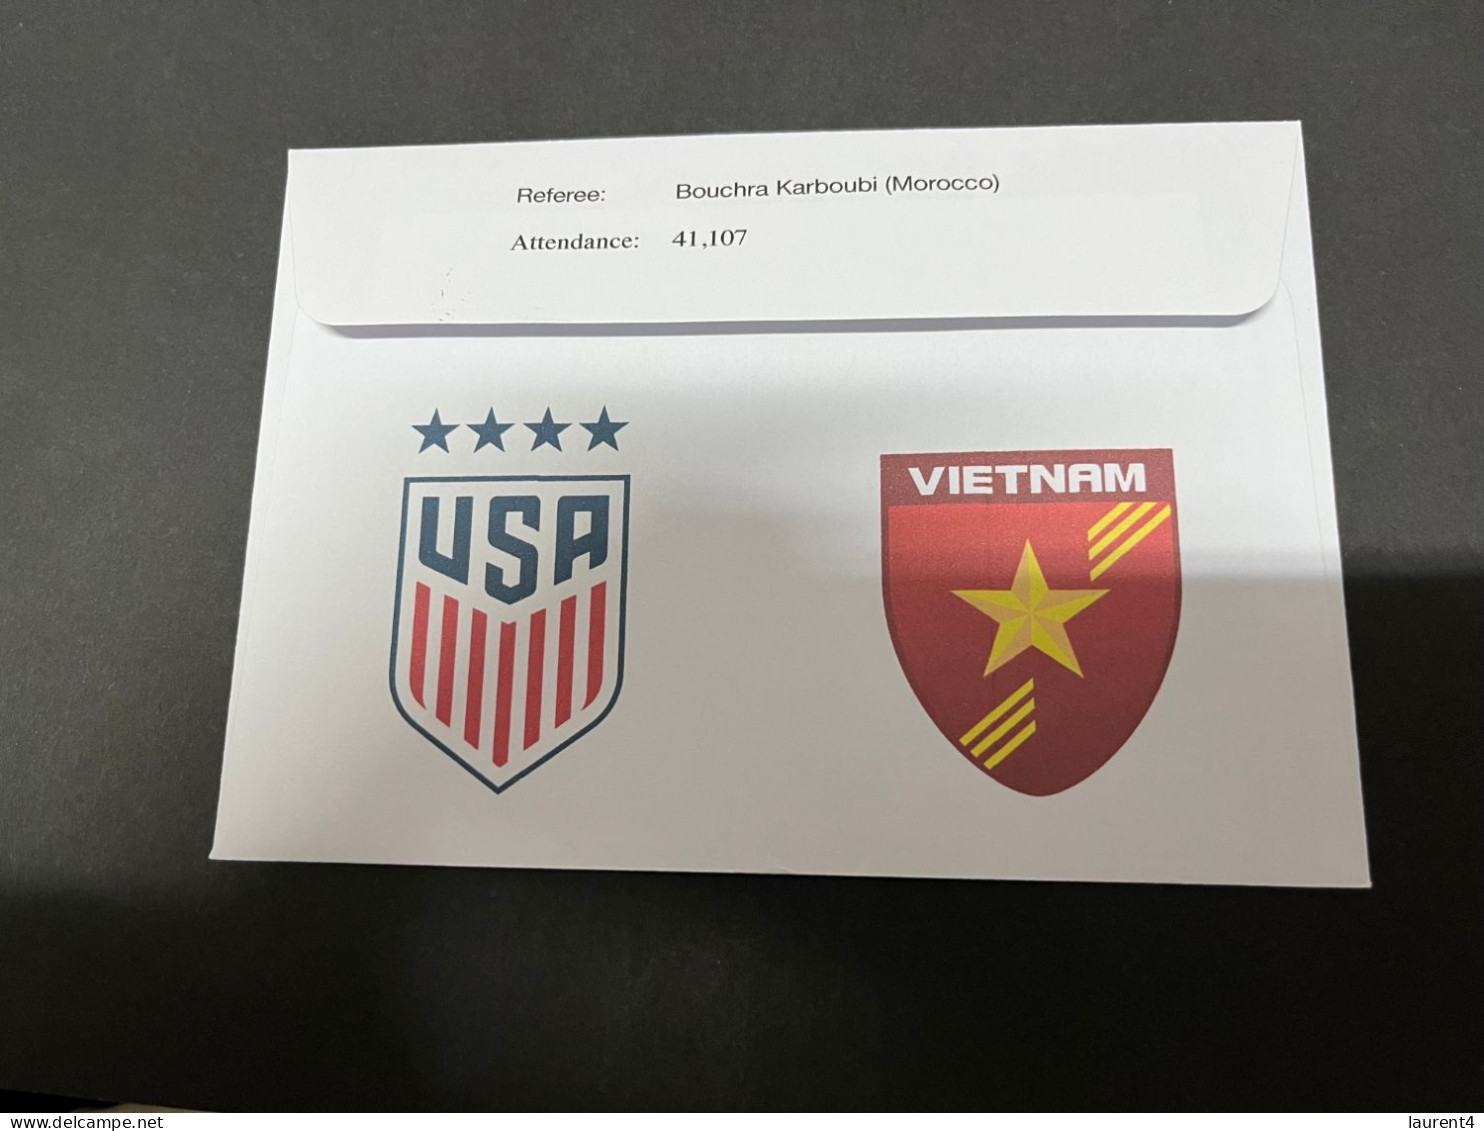 22-7-2023 (3 S 9) FIFA Women's Football World Cup Match 9 (Stamp + Coin) United States (3) V Vietnam (0) - 2 Dollars